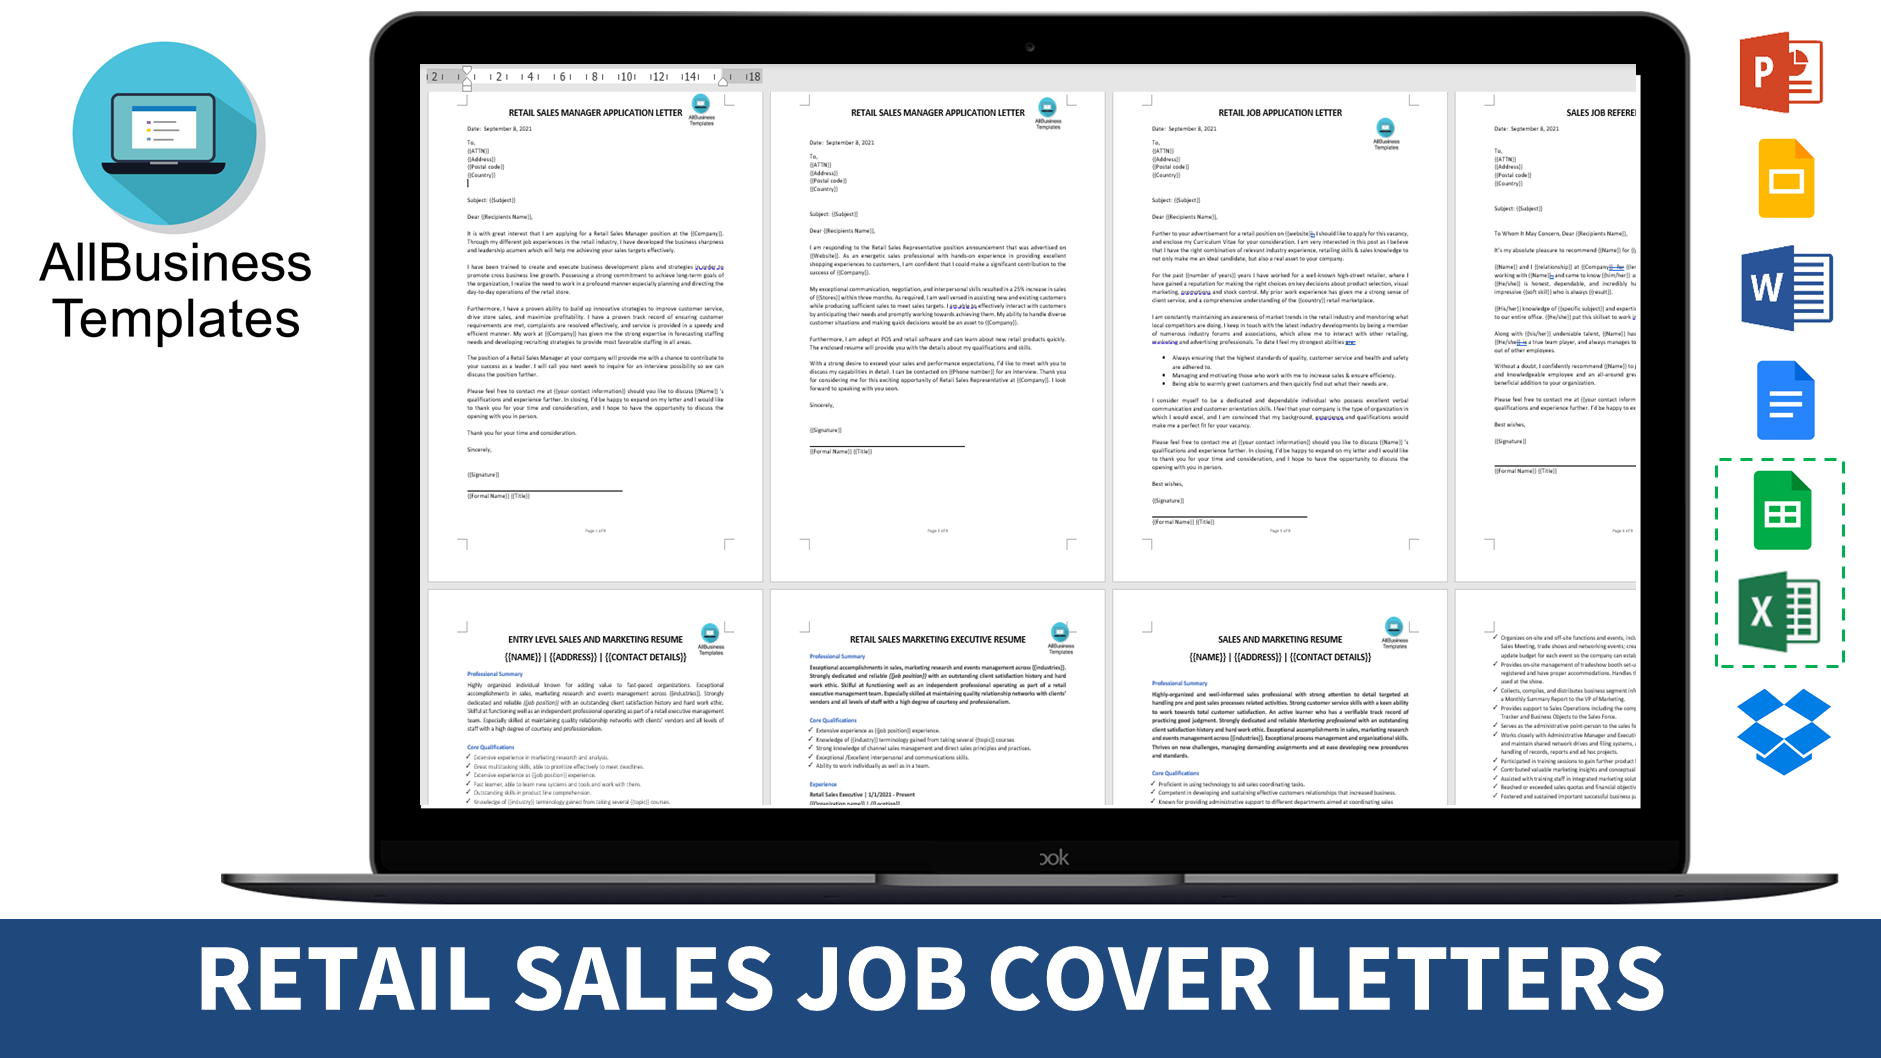 Retail Sales Associate Cover Letter | Templates at ...